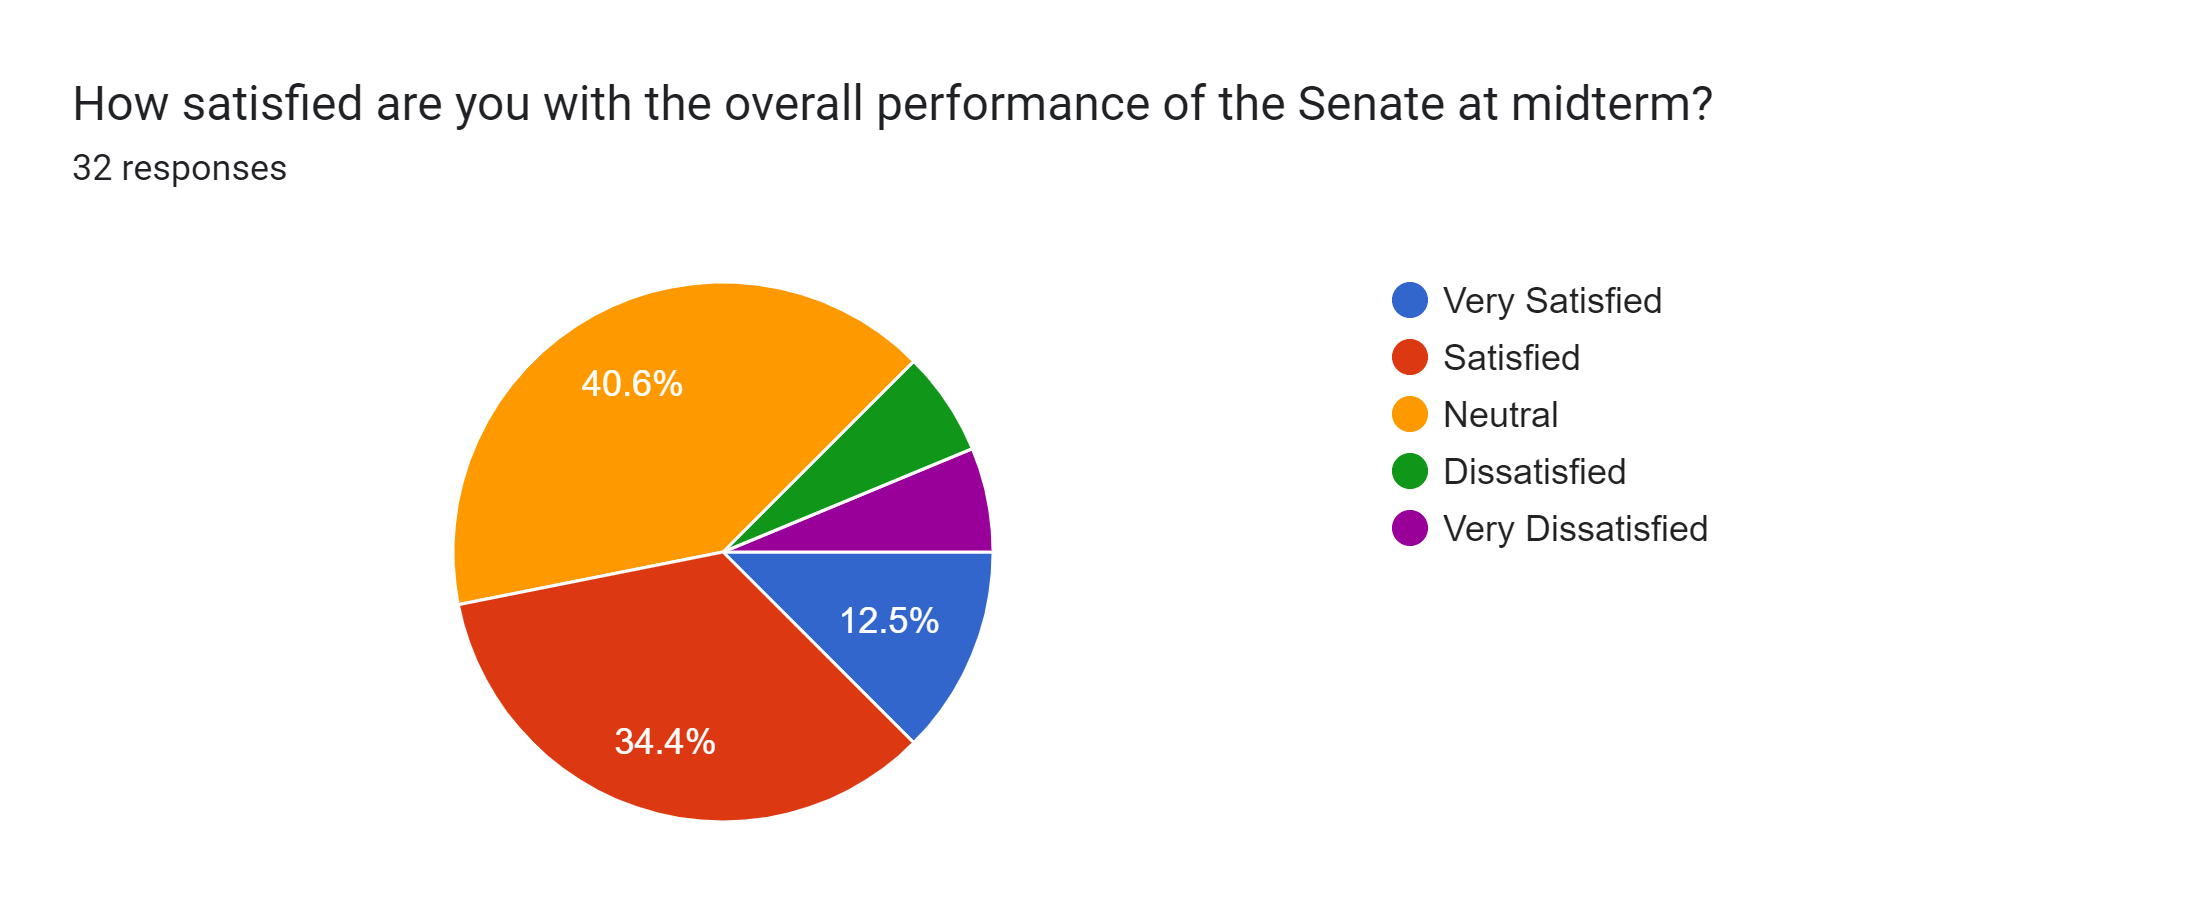 Forms response chart. Question title: How satisfied are you with the overall performance of the Senate at midterm?. Number of responses: 32 responses.